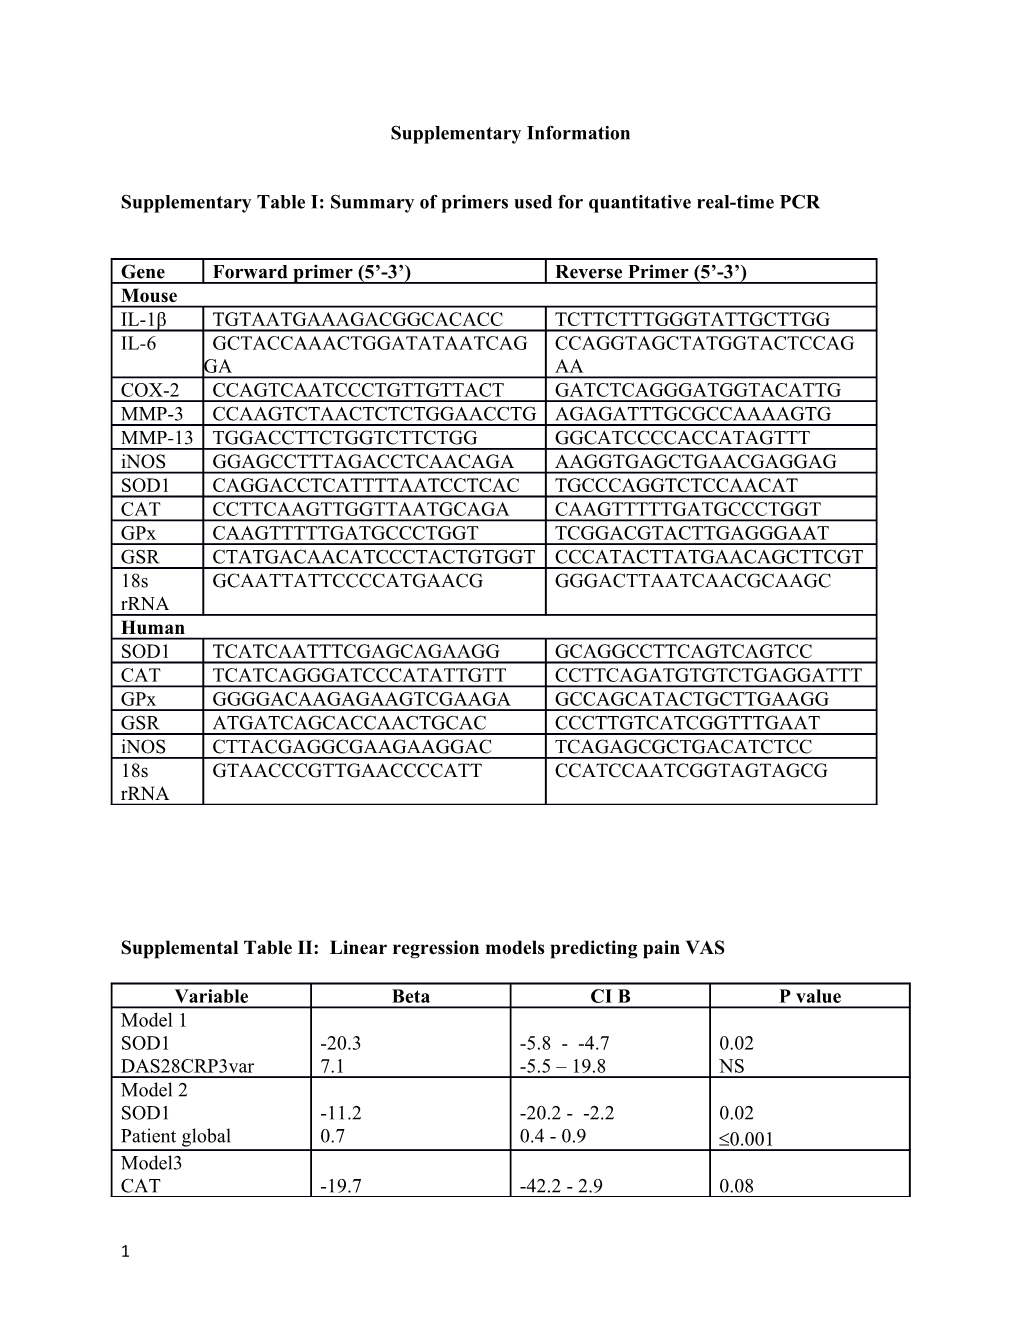 Supplementary Table I: Summary of Primers Used for Quantitative Real-Time PCR